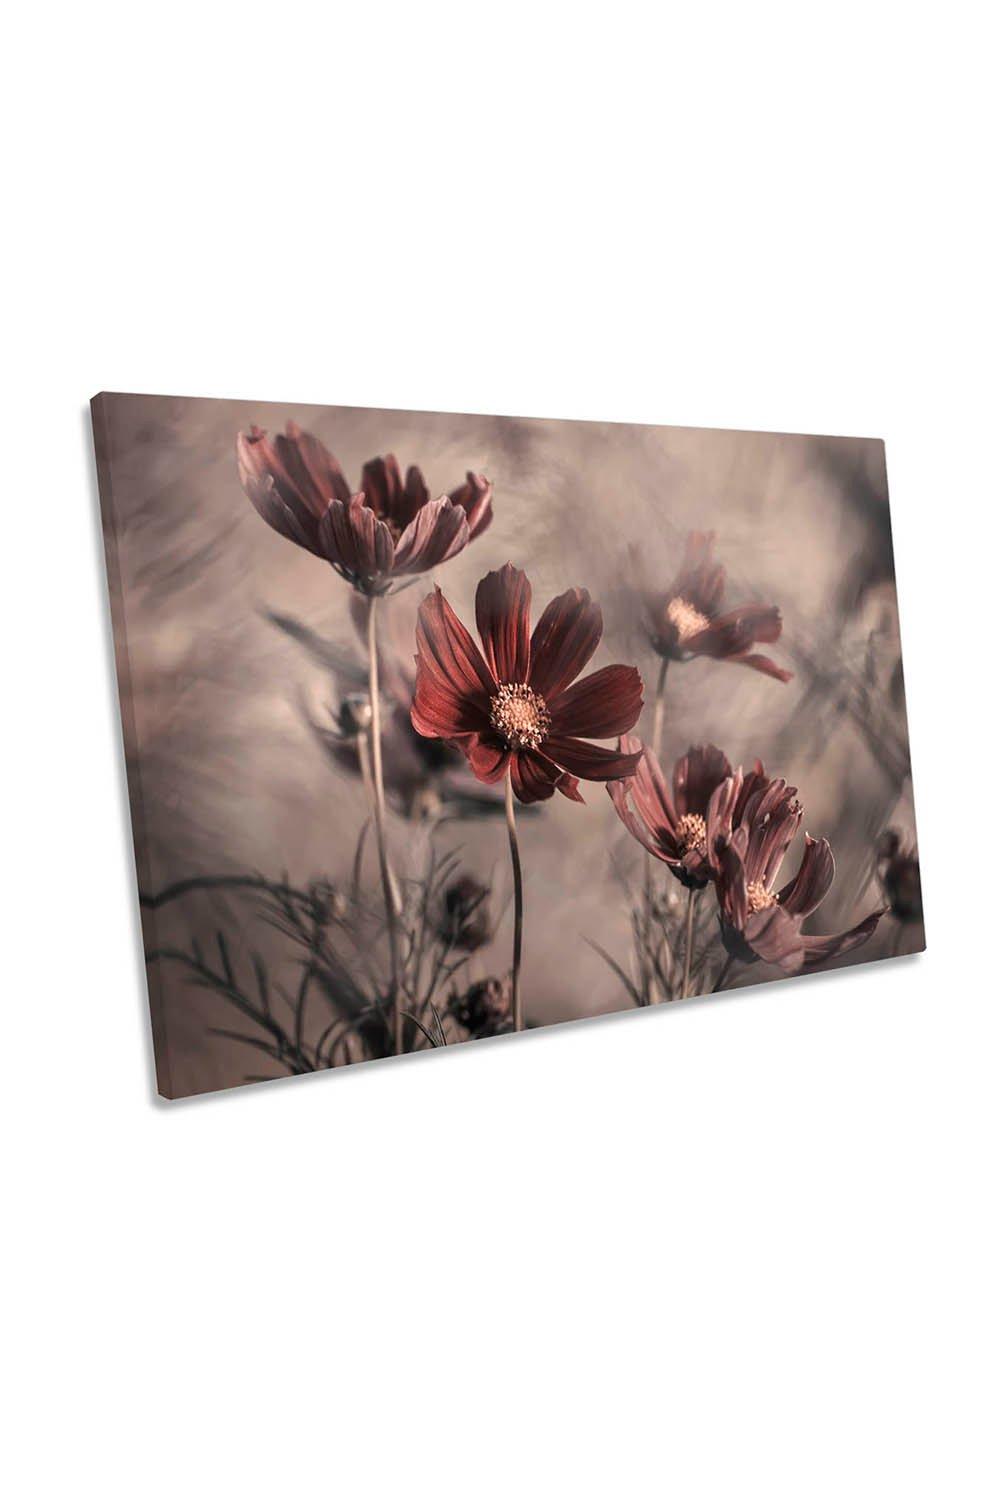 Cosmos Floral Flower Garden Canvas Wall Art Picture Print